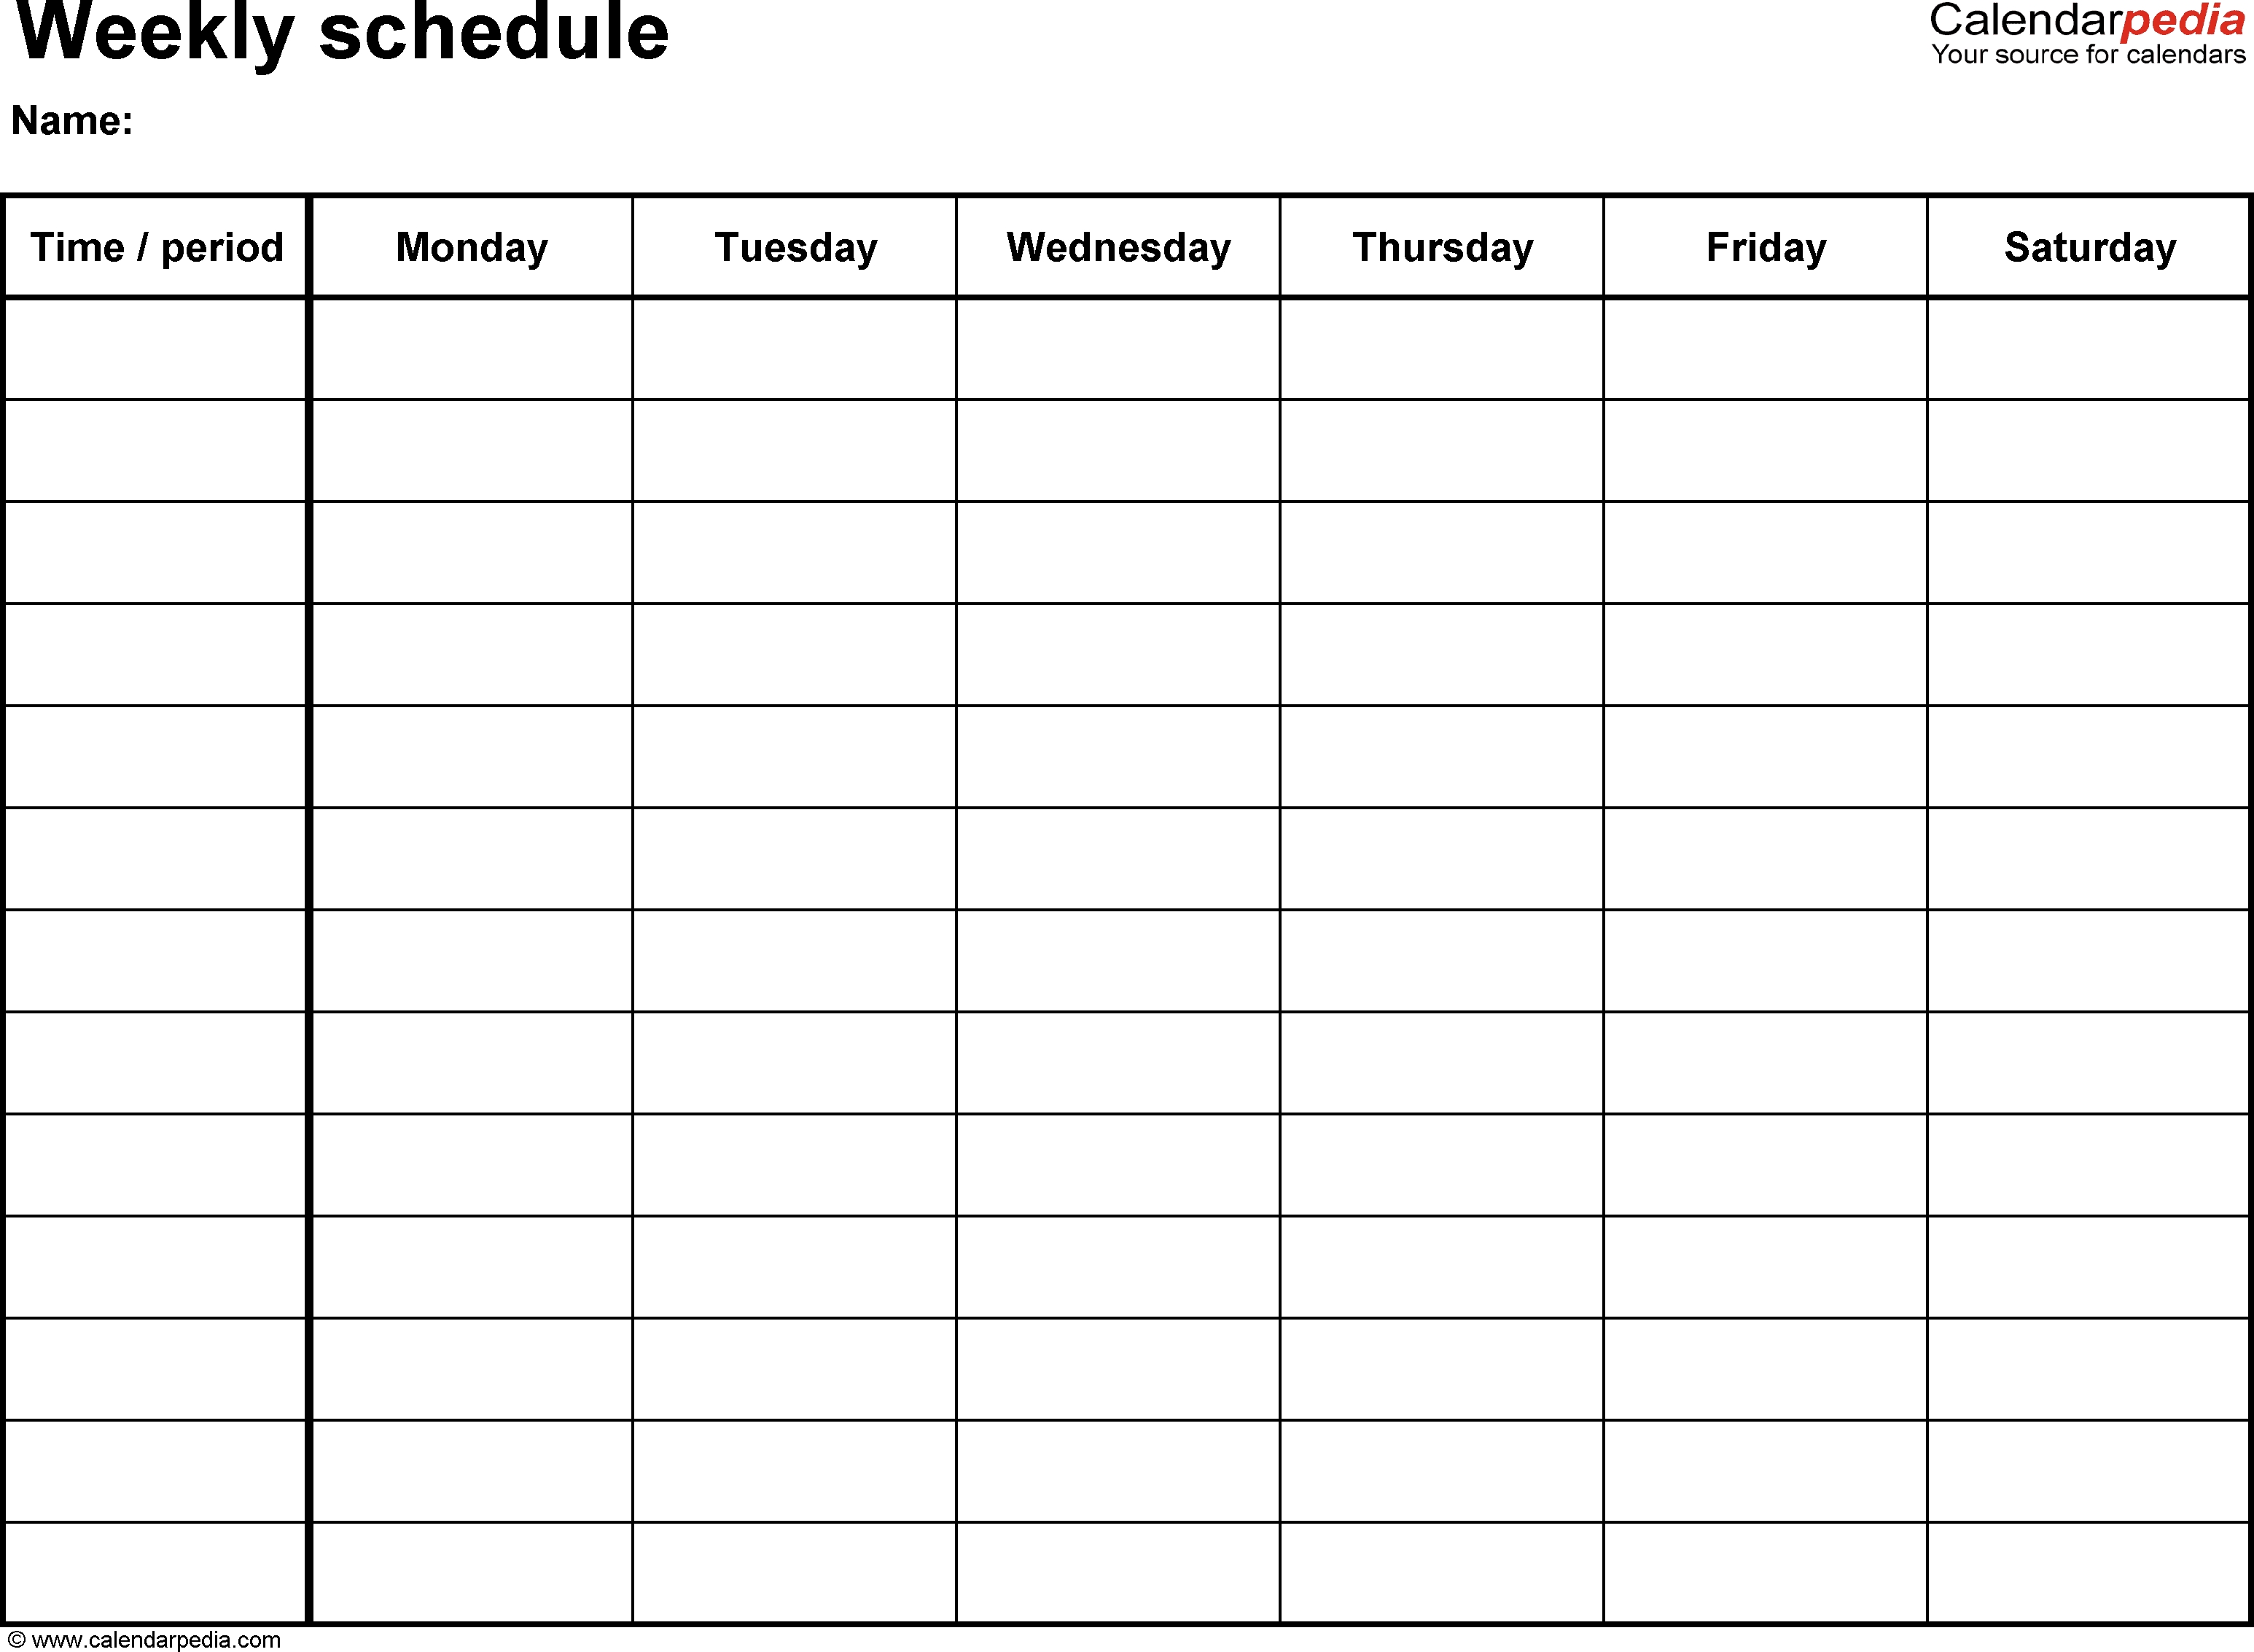 Free Weekly Schedule Templates For Excel - 18 Templates pertaining to Monthly Route Schedule Template Free